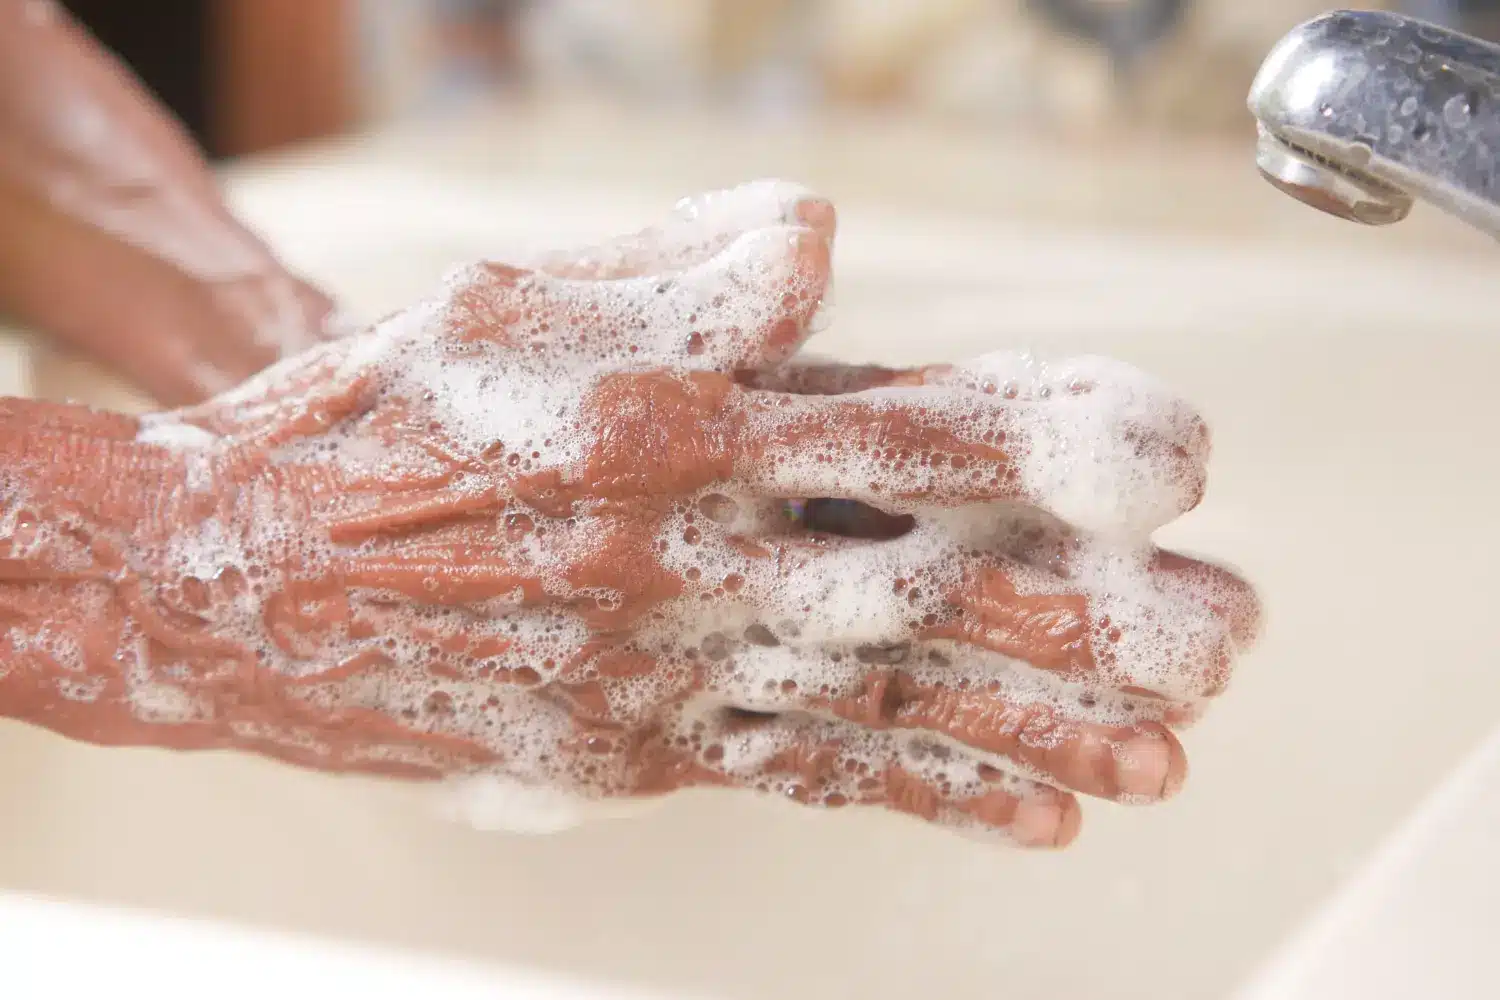 man lathering soap with hands